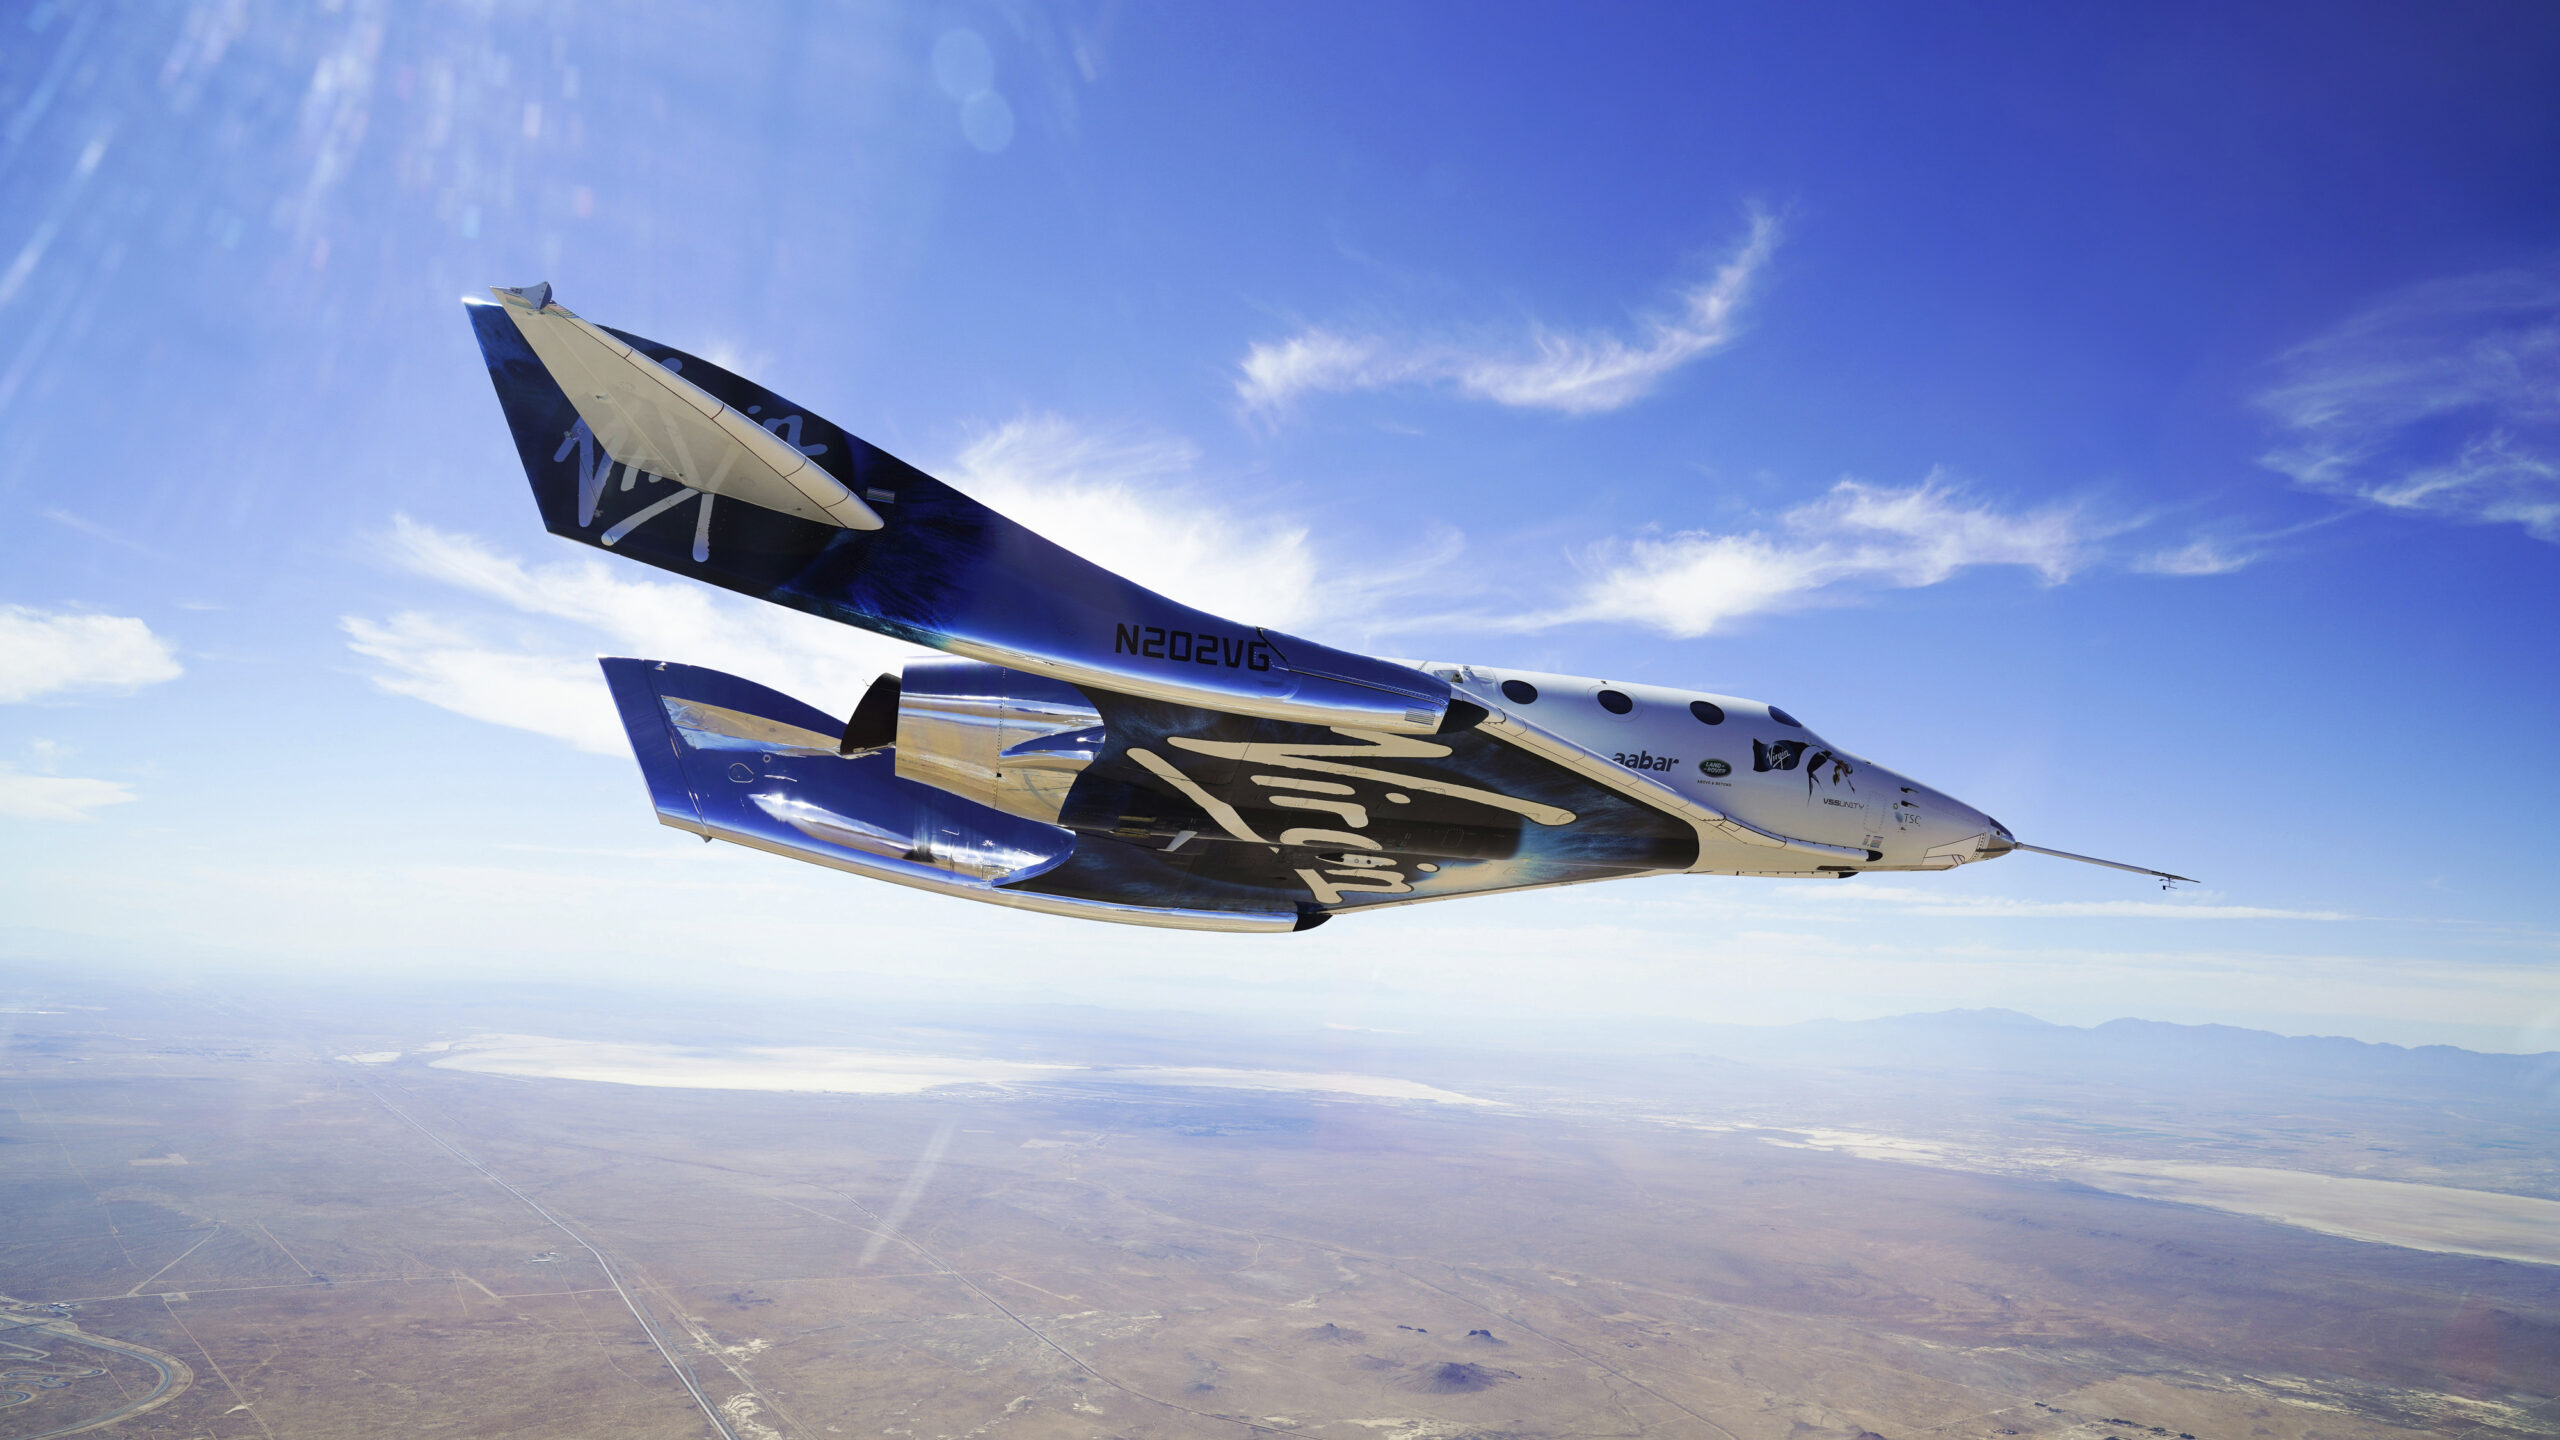 File photo of Virgin Galactic's VSS Unity spacecraft, flying during a supersonic flight test in 201...